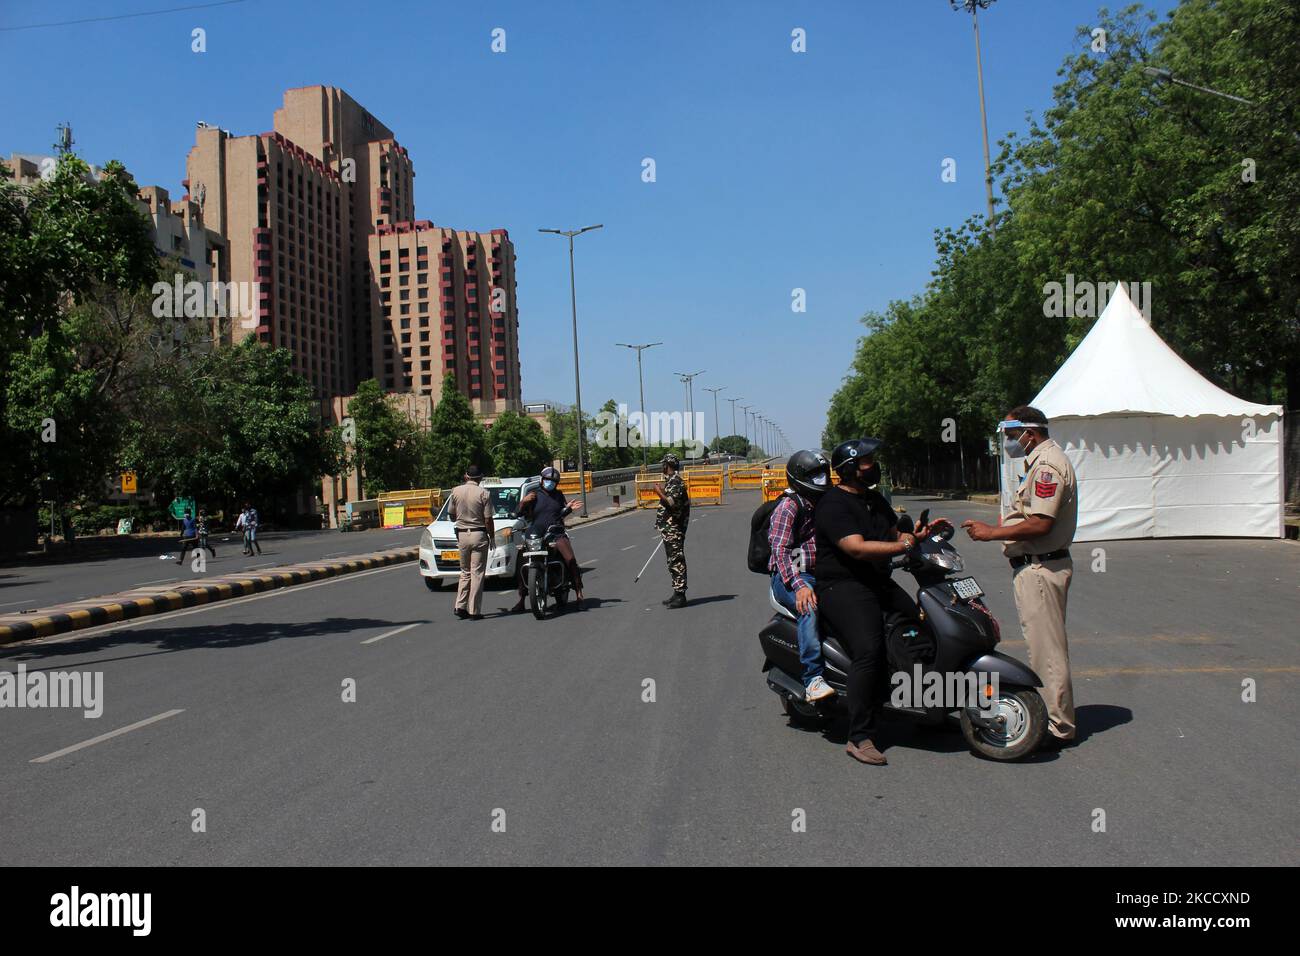 Delhi Police officers stop vehicles at a check point during a weekend lockdown in New Delhi, India on April 17, 2021. India on Saturday reported 2,34,692 new Covid-19 cases and 1,341 deaths in the last 24 hours, according to data from the Union Health Ministry. (Photo by Mayank Makhija/NurPhoto) Stock Photo